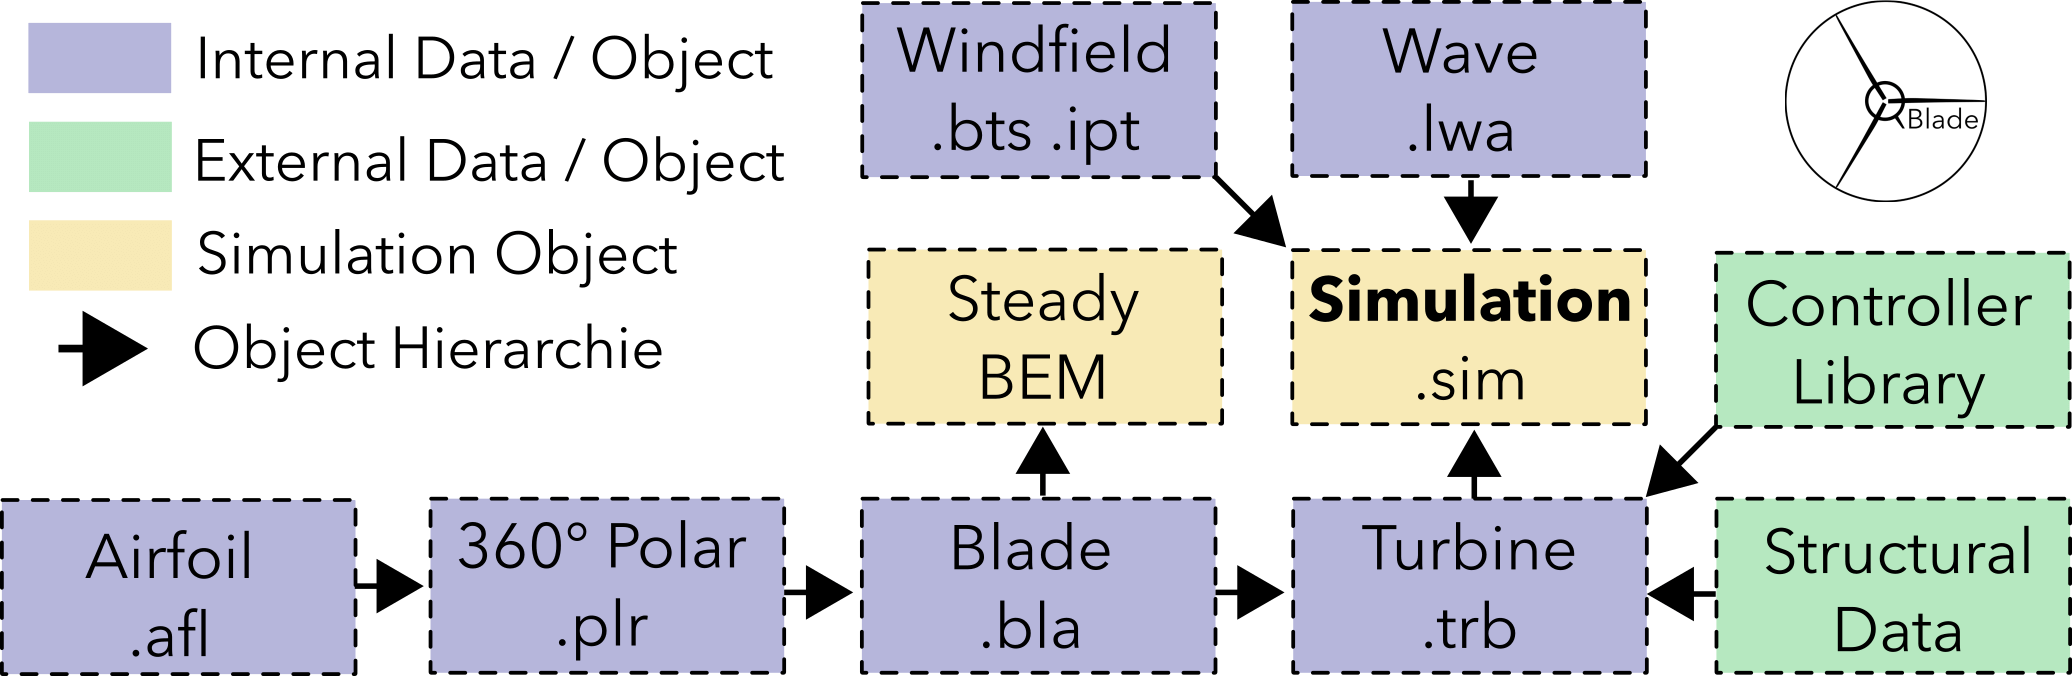 Overview of QBlades data structure